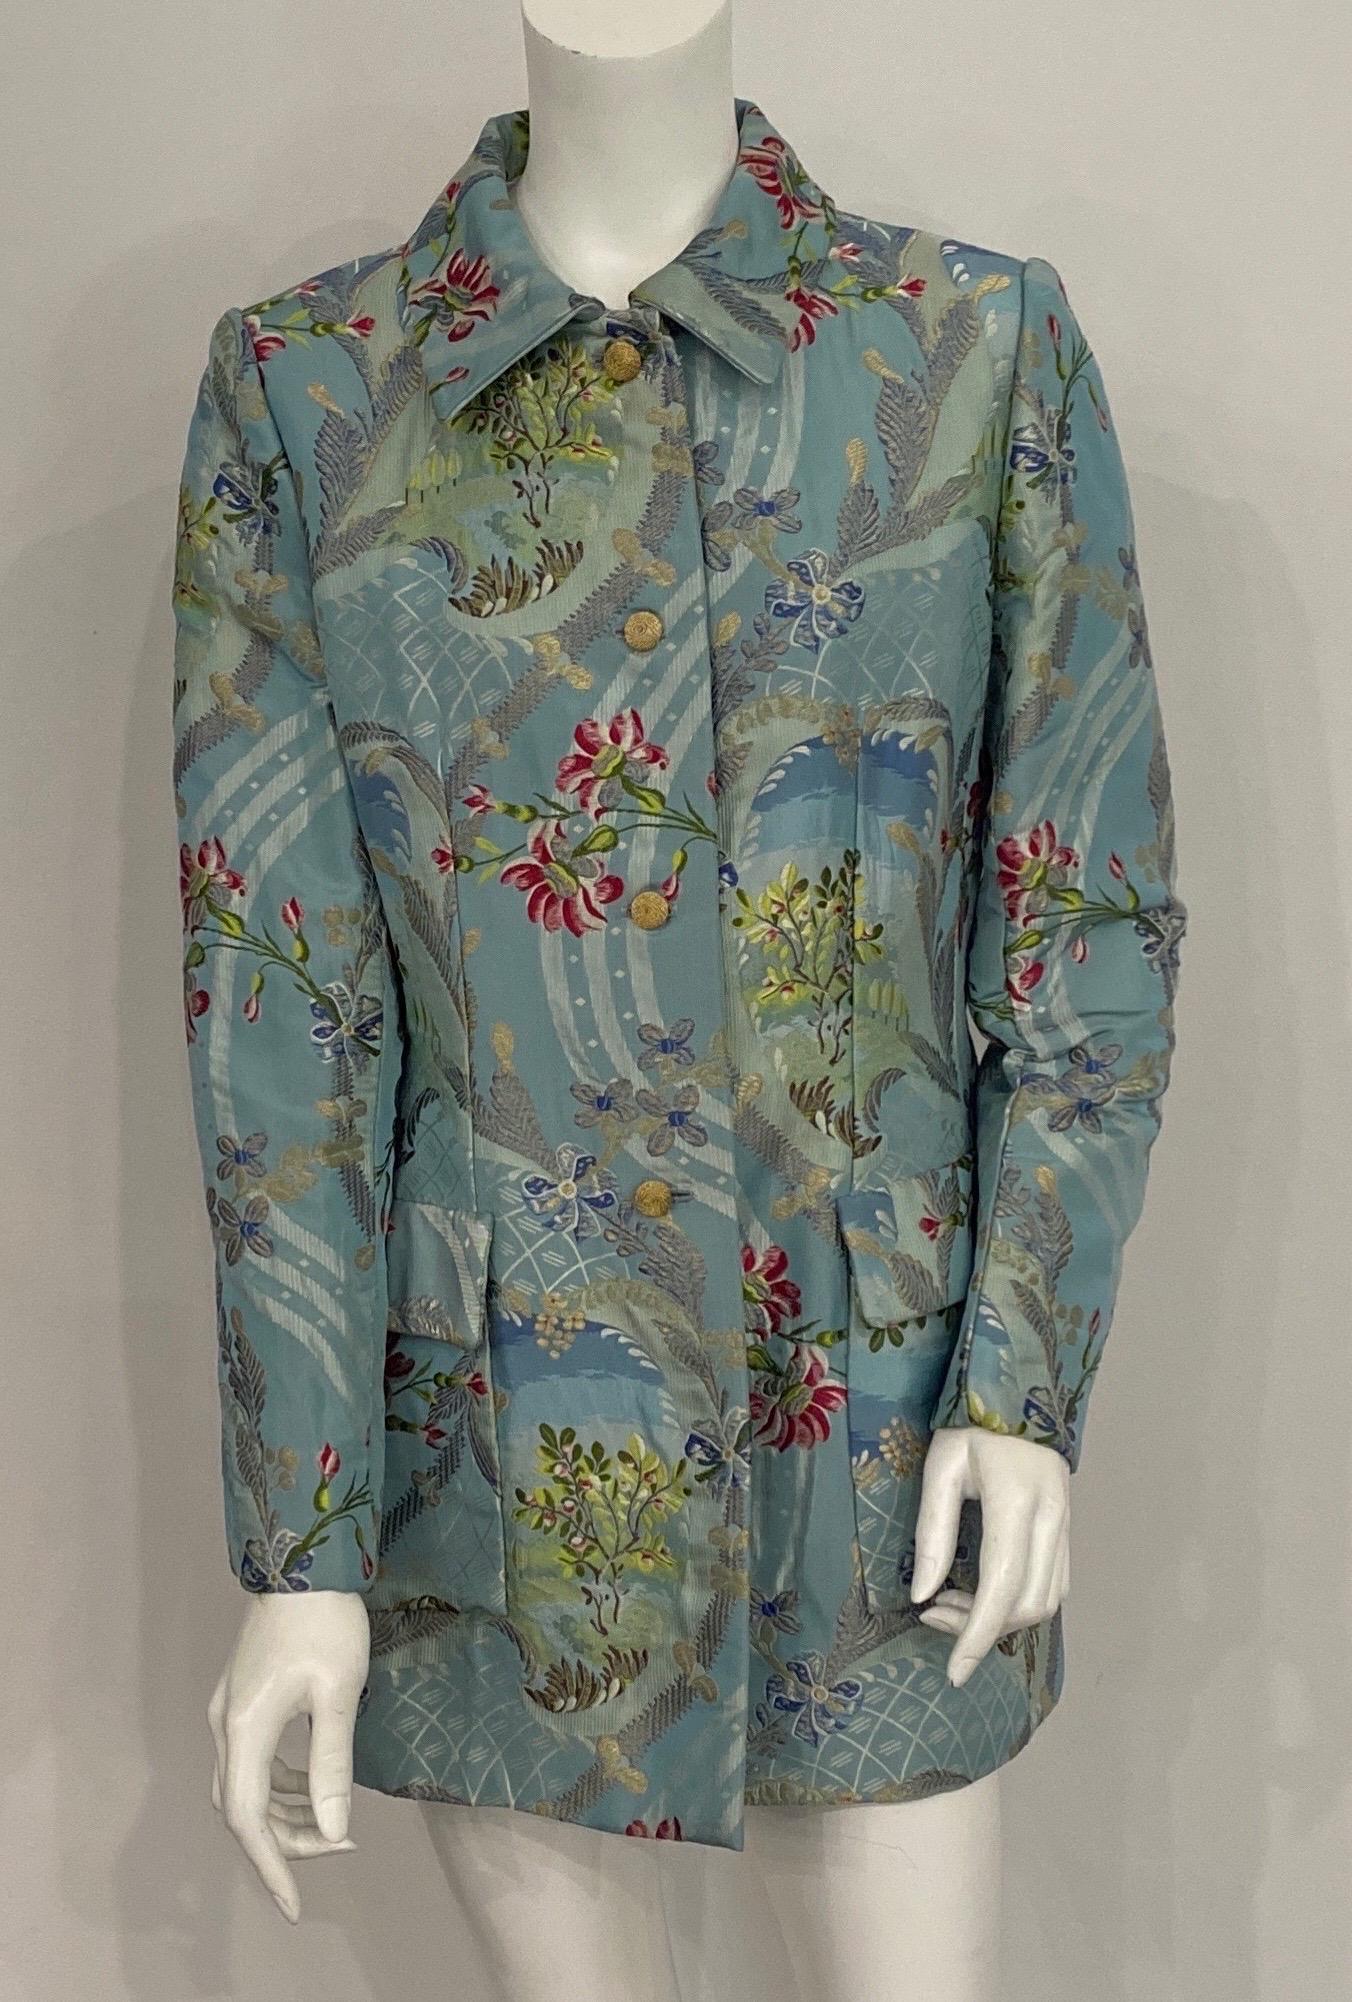 Bill Blass Blue Silk Floral Brocade Long Jacket-Size 6. This late 90's dressy mid-thigh long jacket is made of a beautiful blue silk brocade that has a floral pattern with gold metallic threading throughout. The jacket is fully lined, has 4 gold